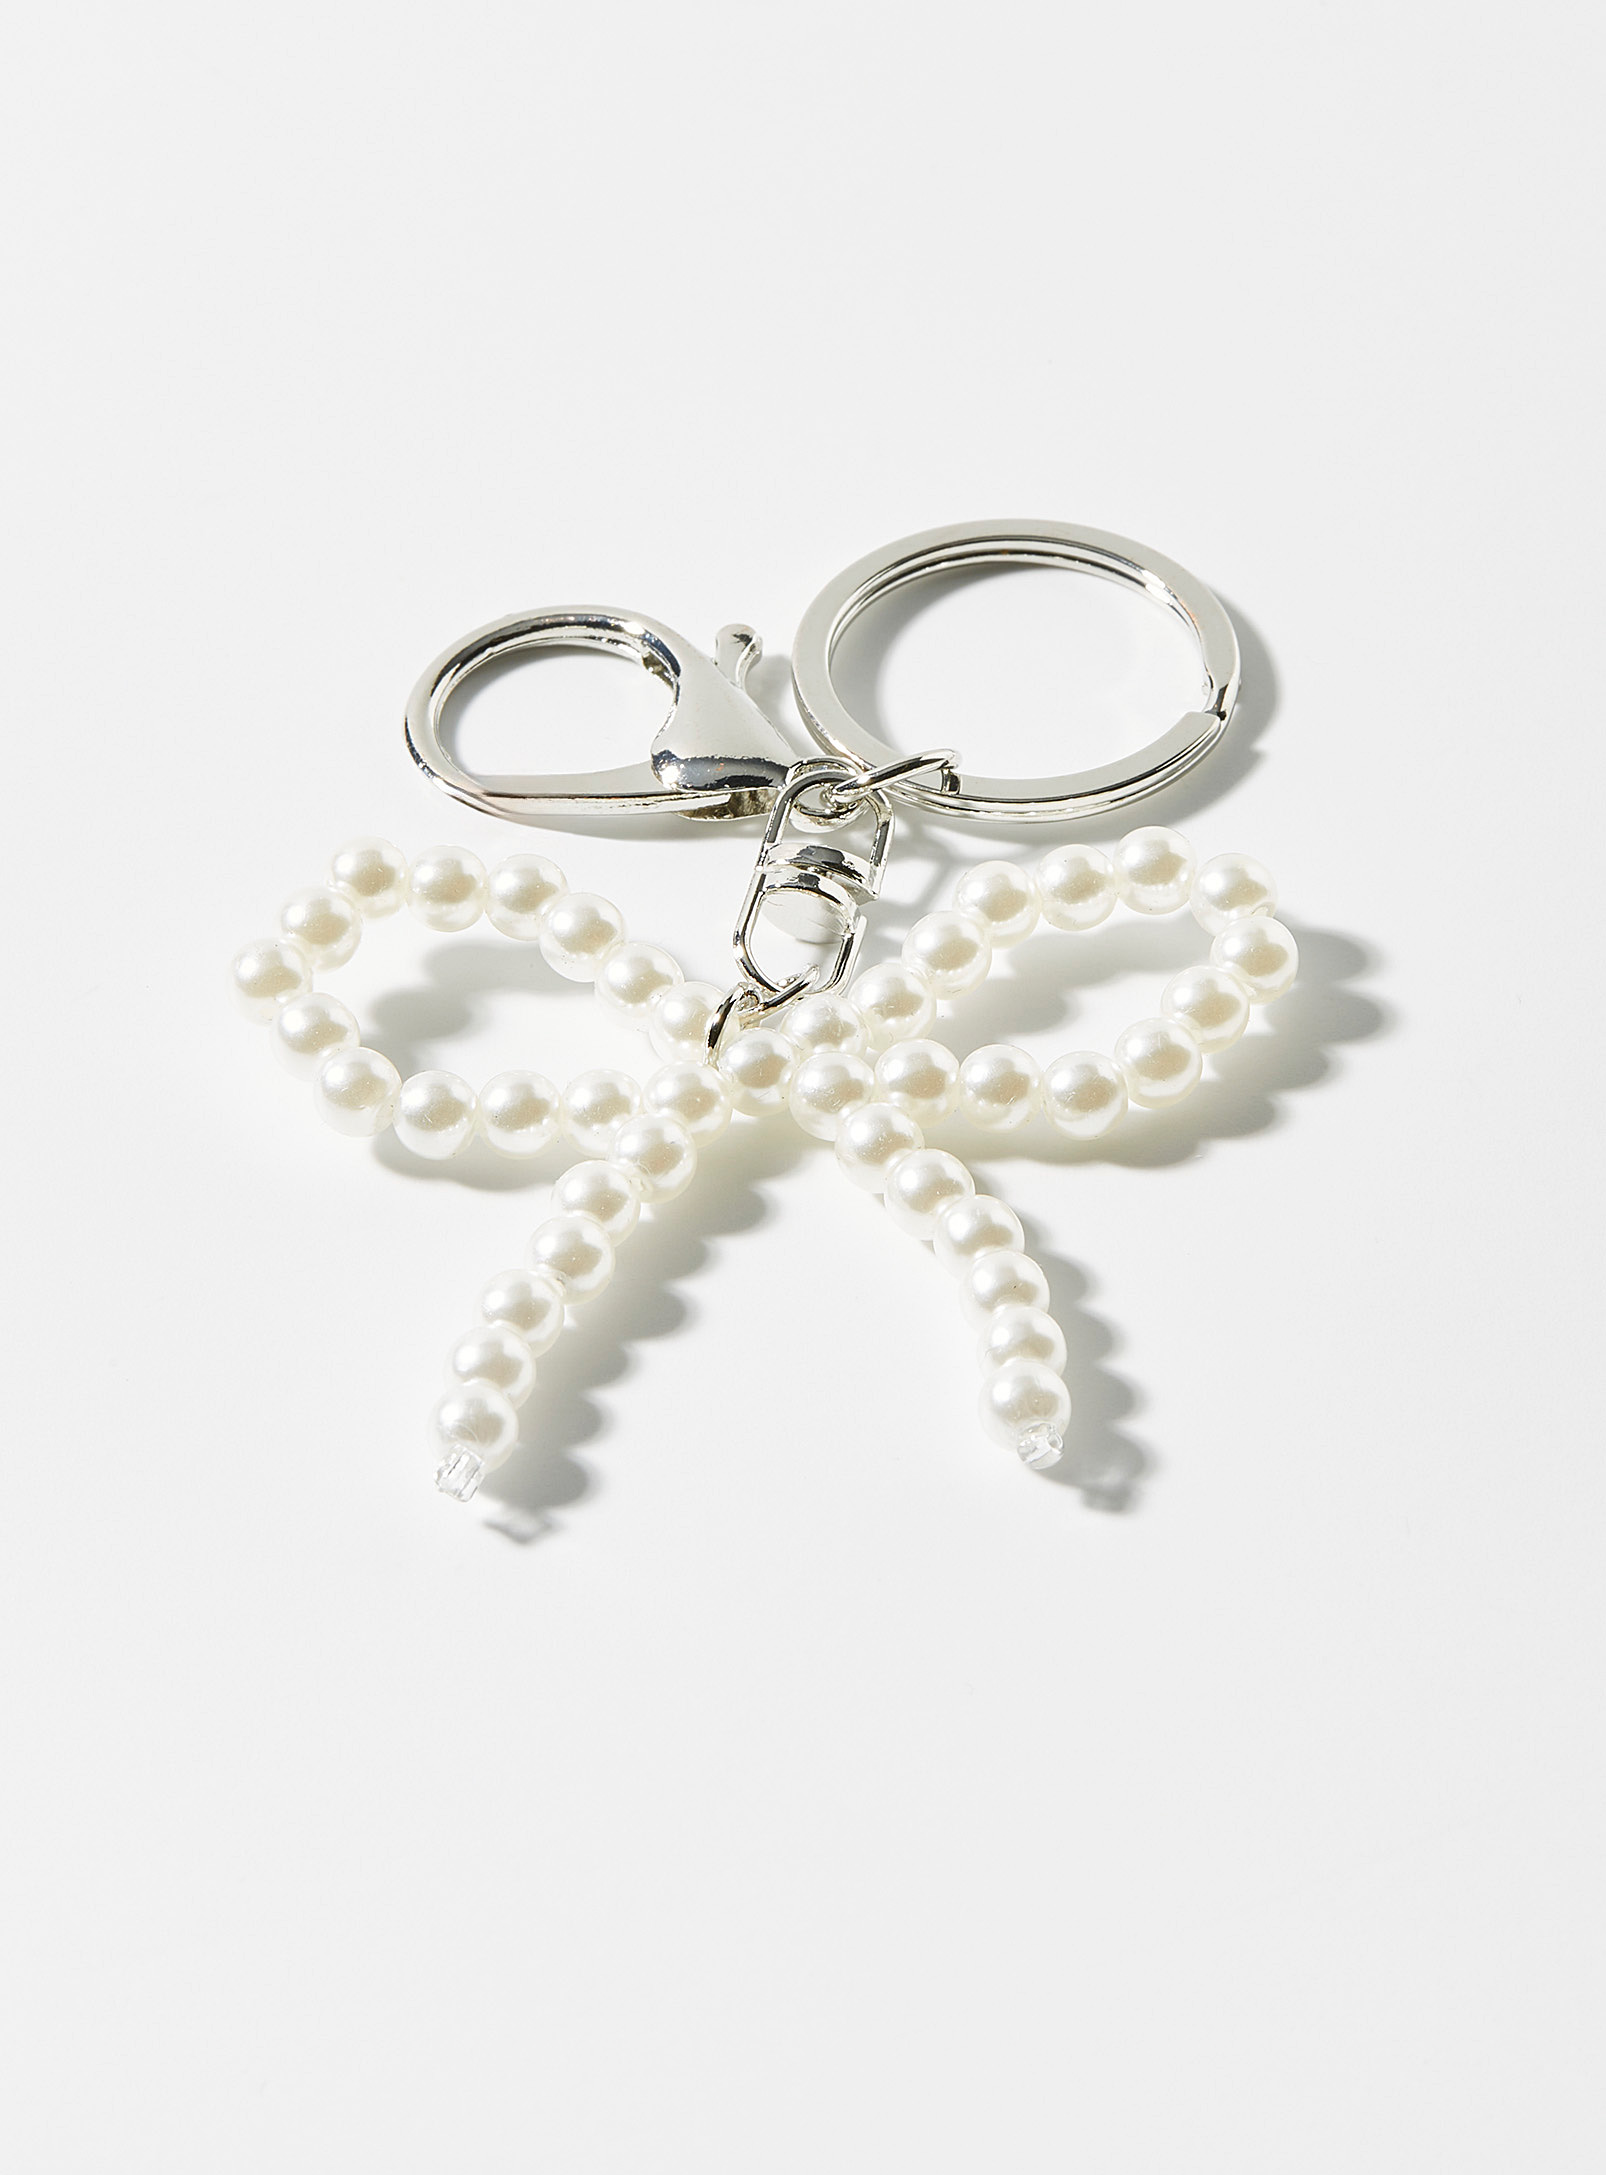 Simons - Women's Pearly bow keychain